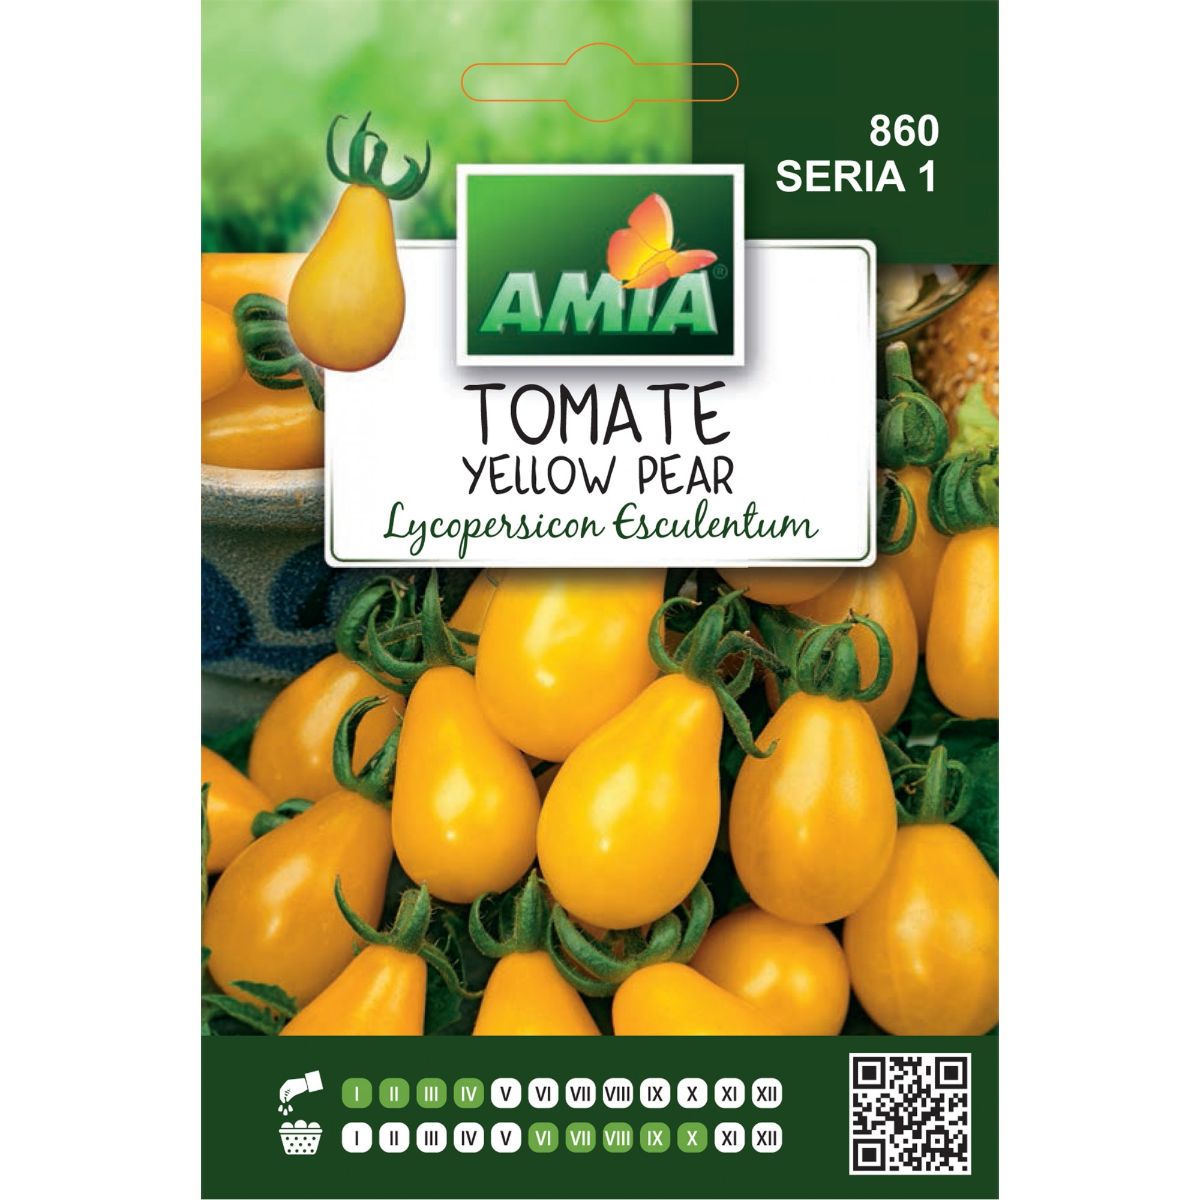 Tomate - Seminte Tomate YELLOW PEAR A AMIA 0.7gr, hectarul.ro